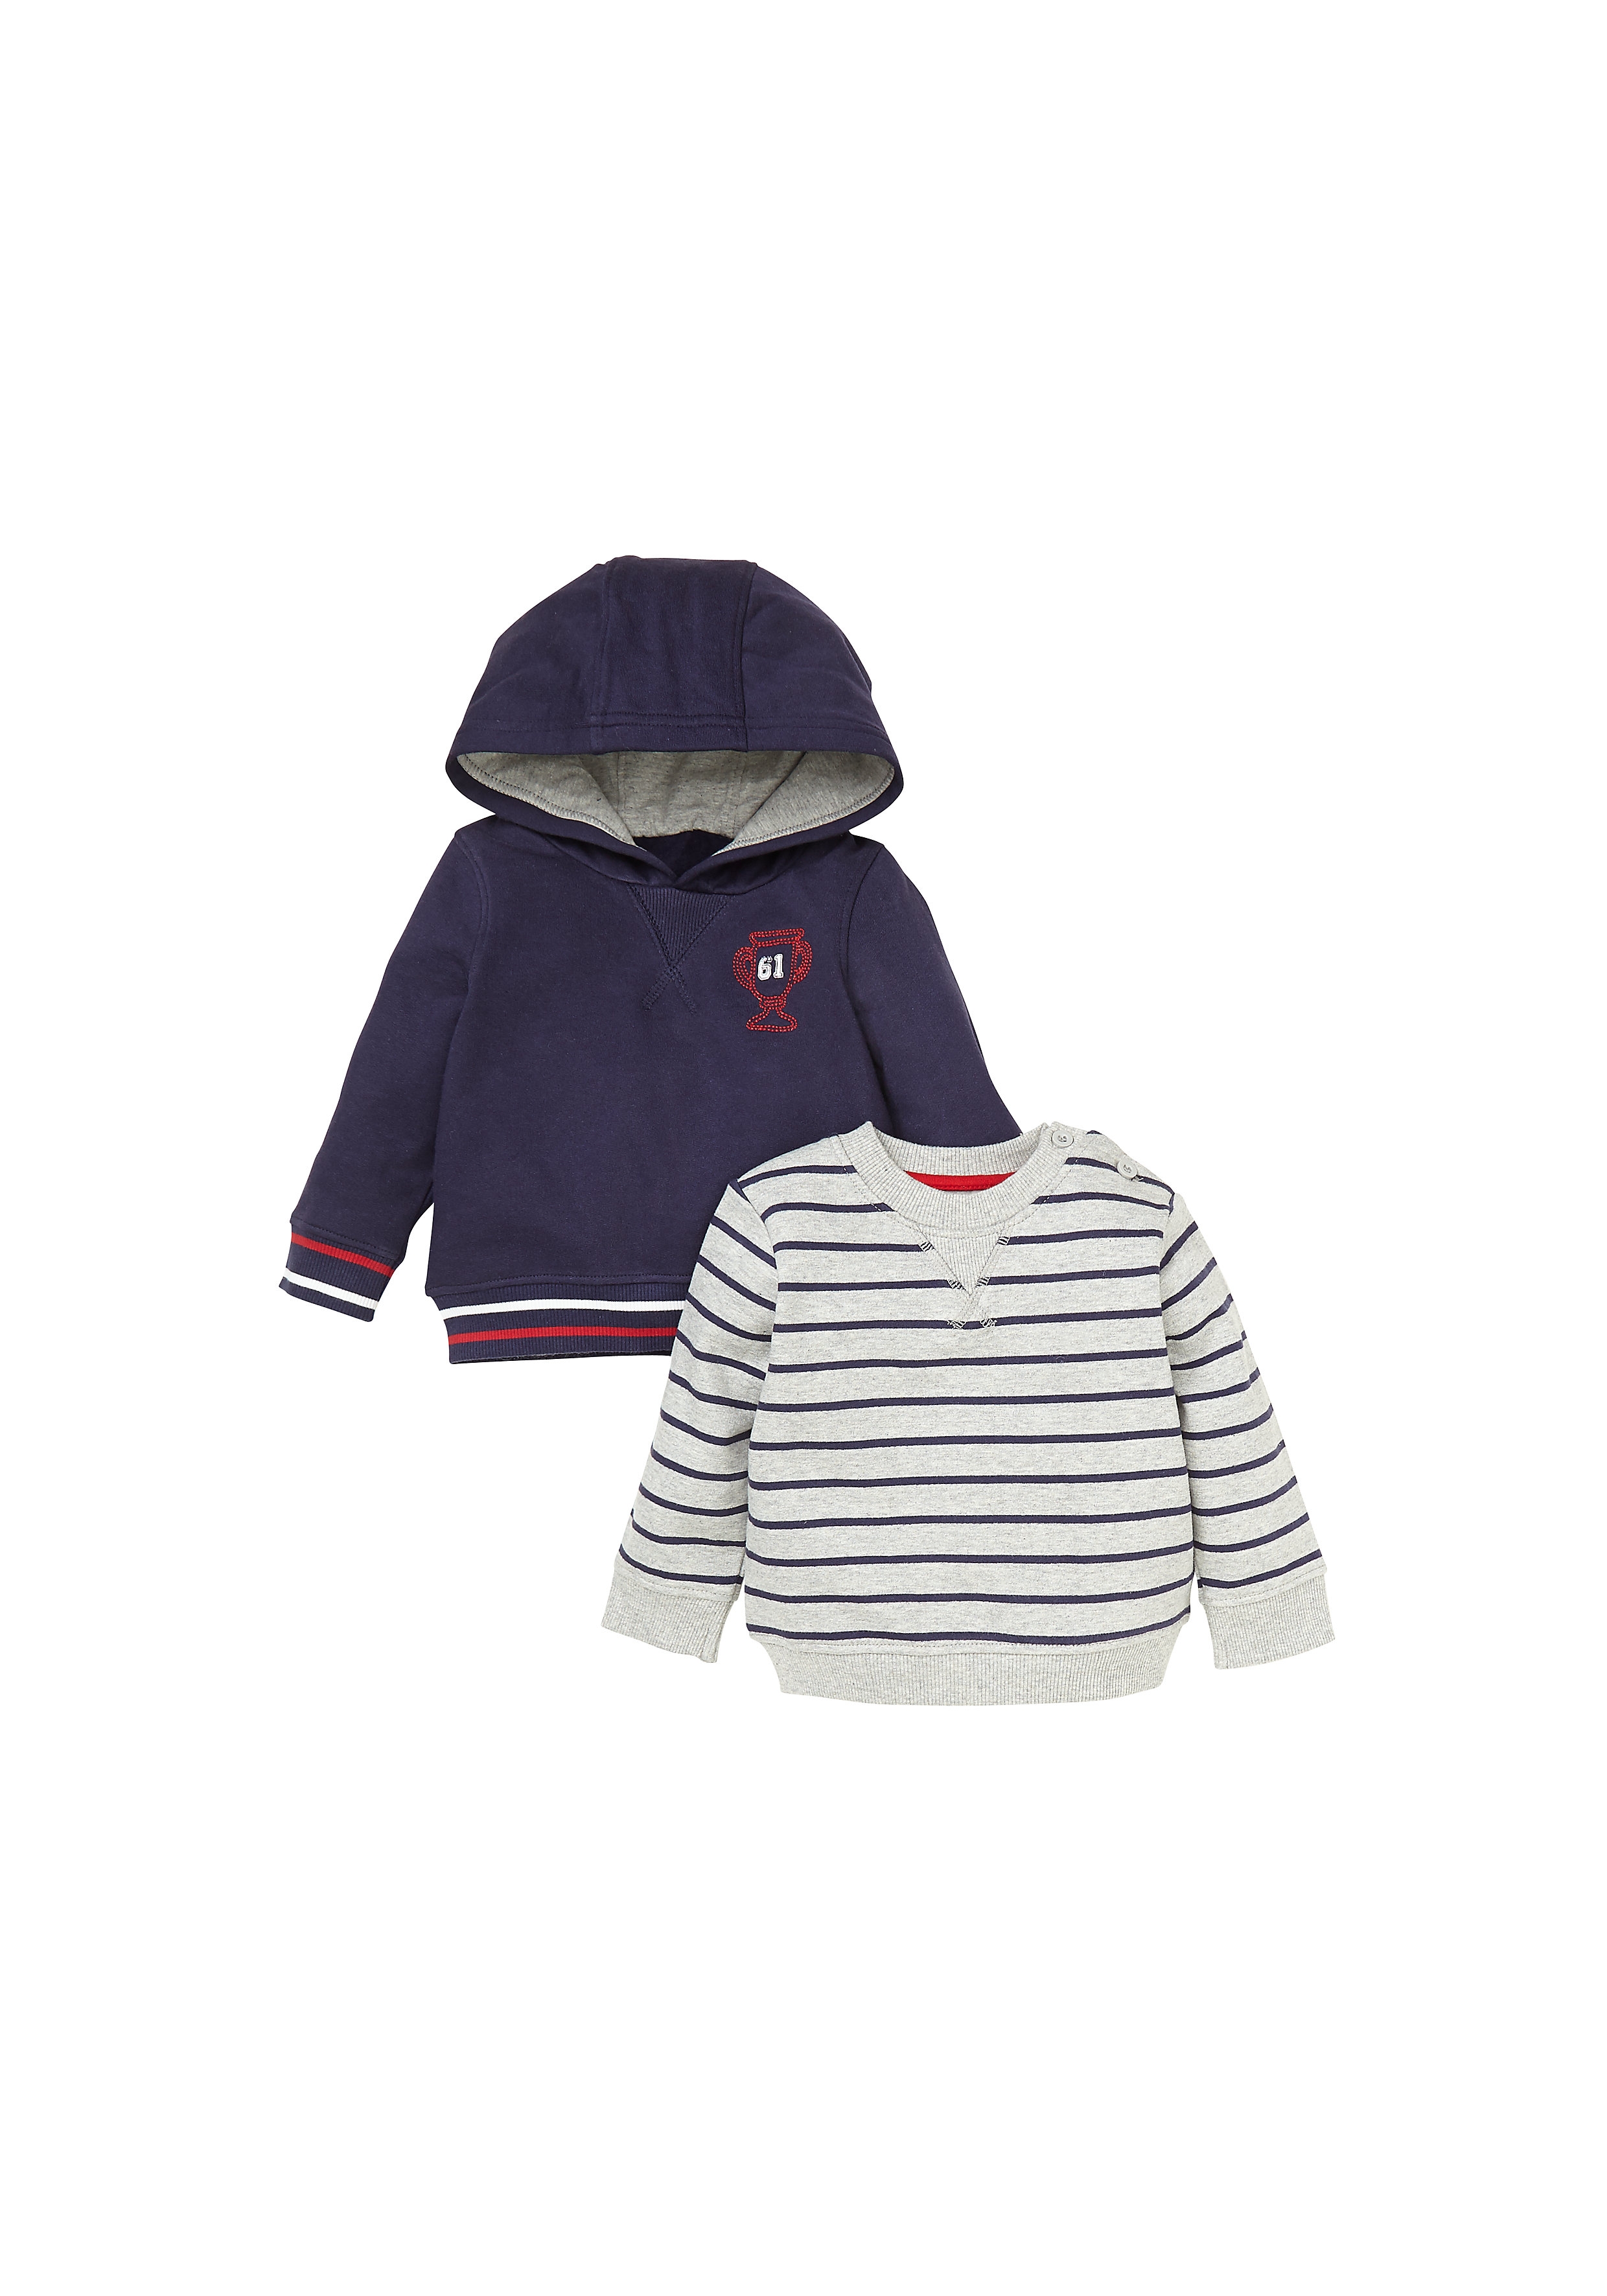 Mothercare | Boys Full Sleeves Sweatshirt Striped - Pack Of 2 - Multicolor 0